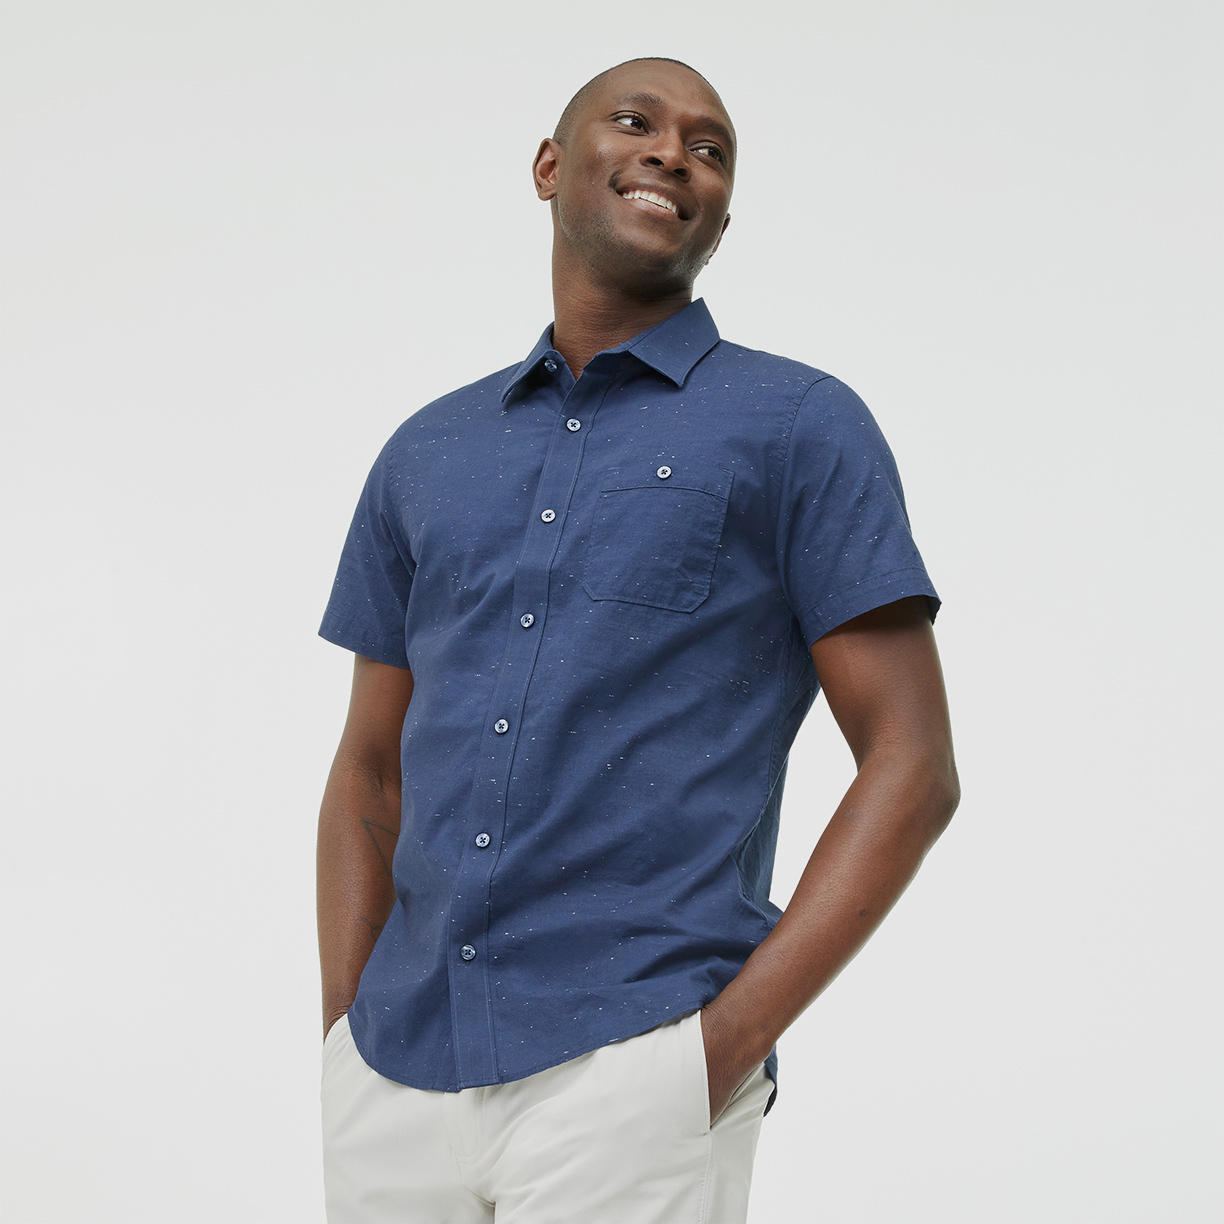 New Styles for Men Up to 60% Off